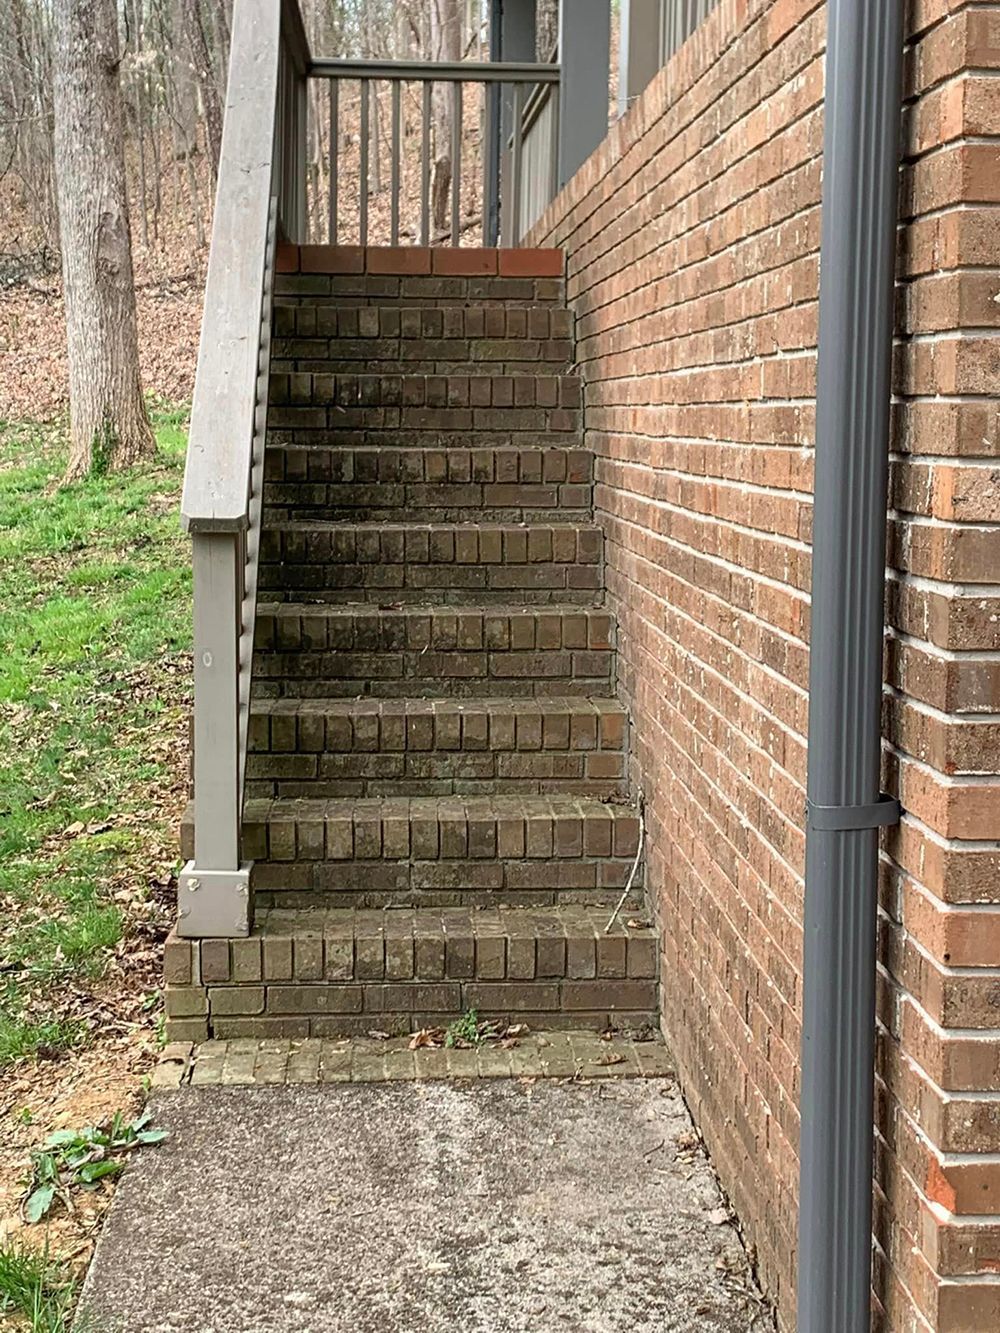 A set of stairs leading up to a brick wall